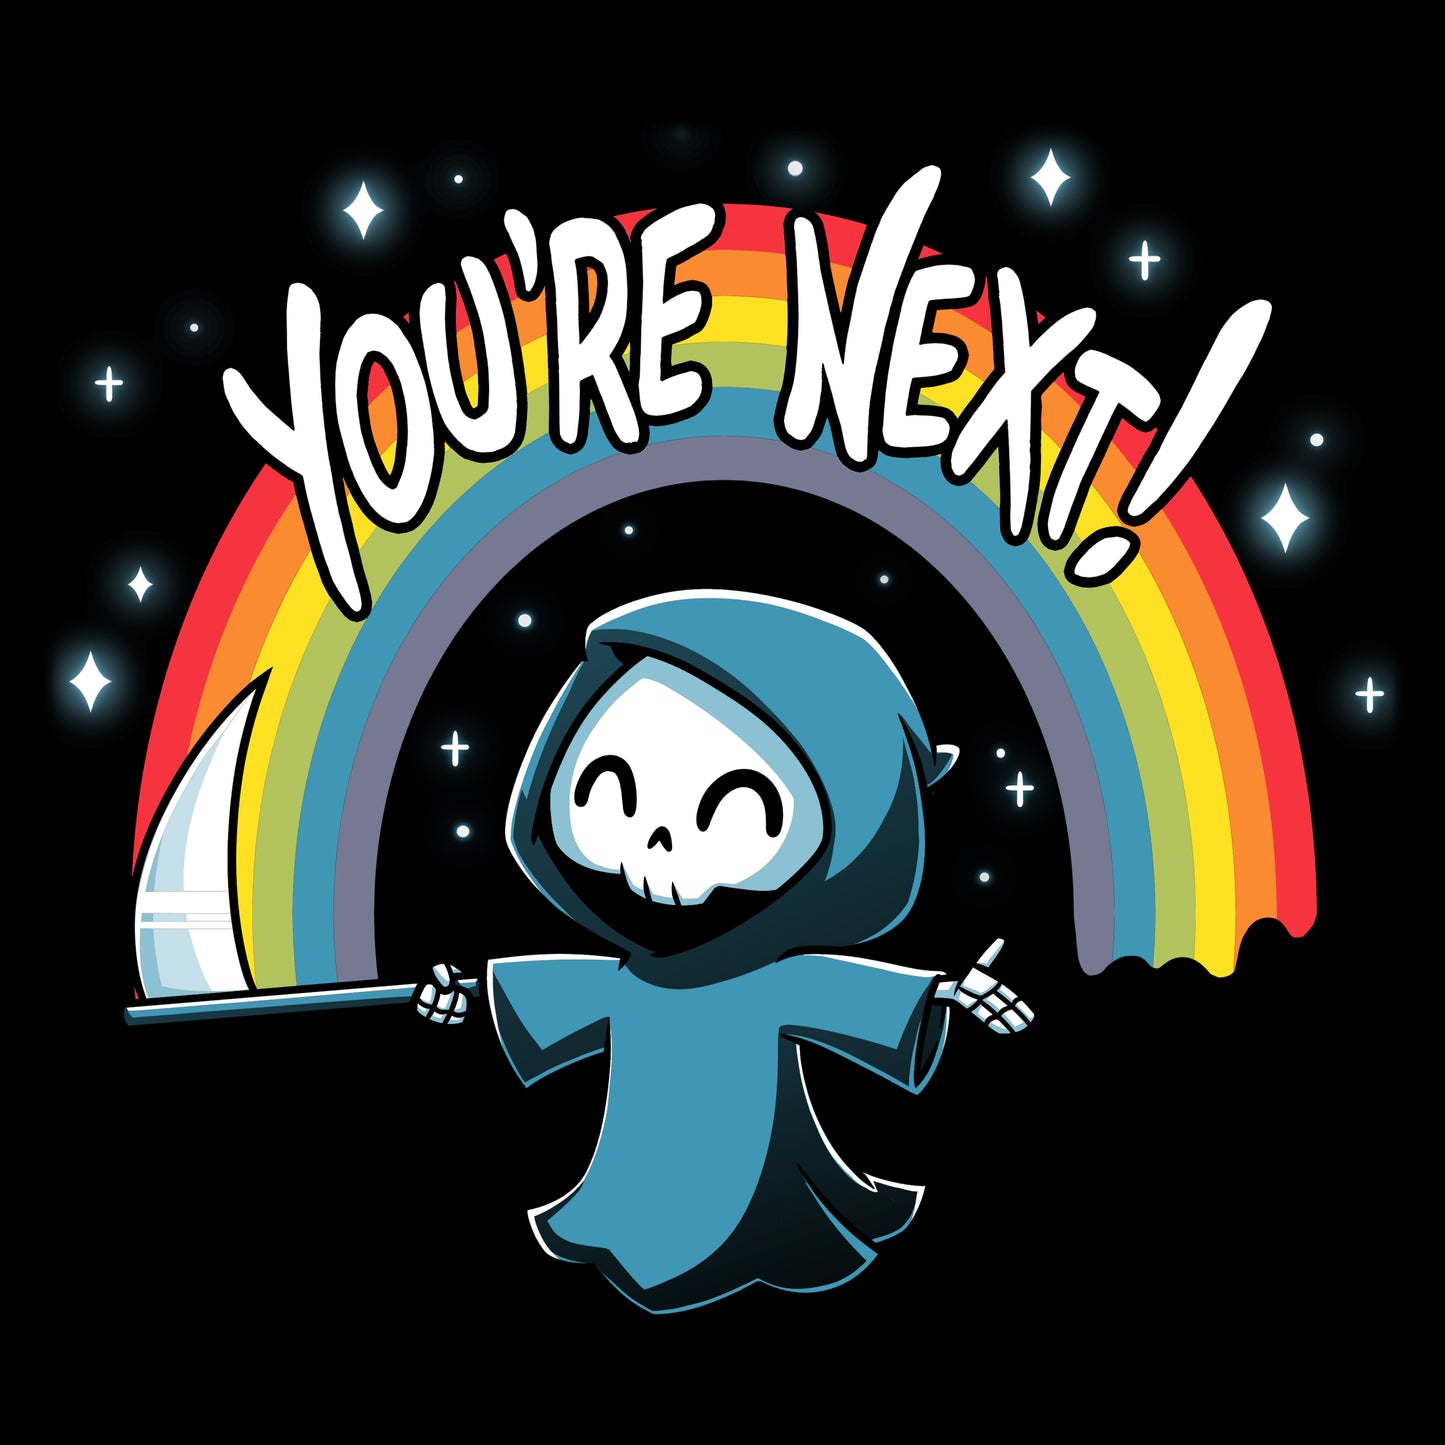 A spooky cartoon skeleton holding a rainbow, with an original twist, saying TeeTurtle's You're Next!